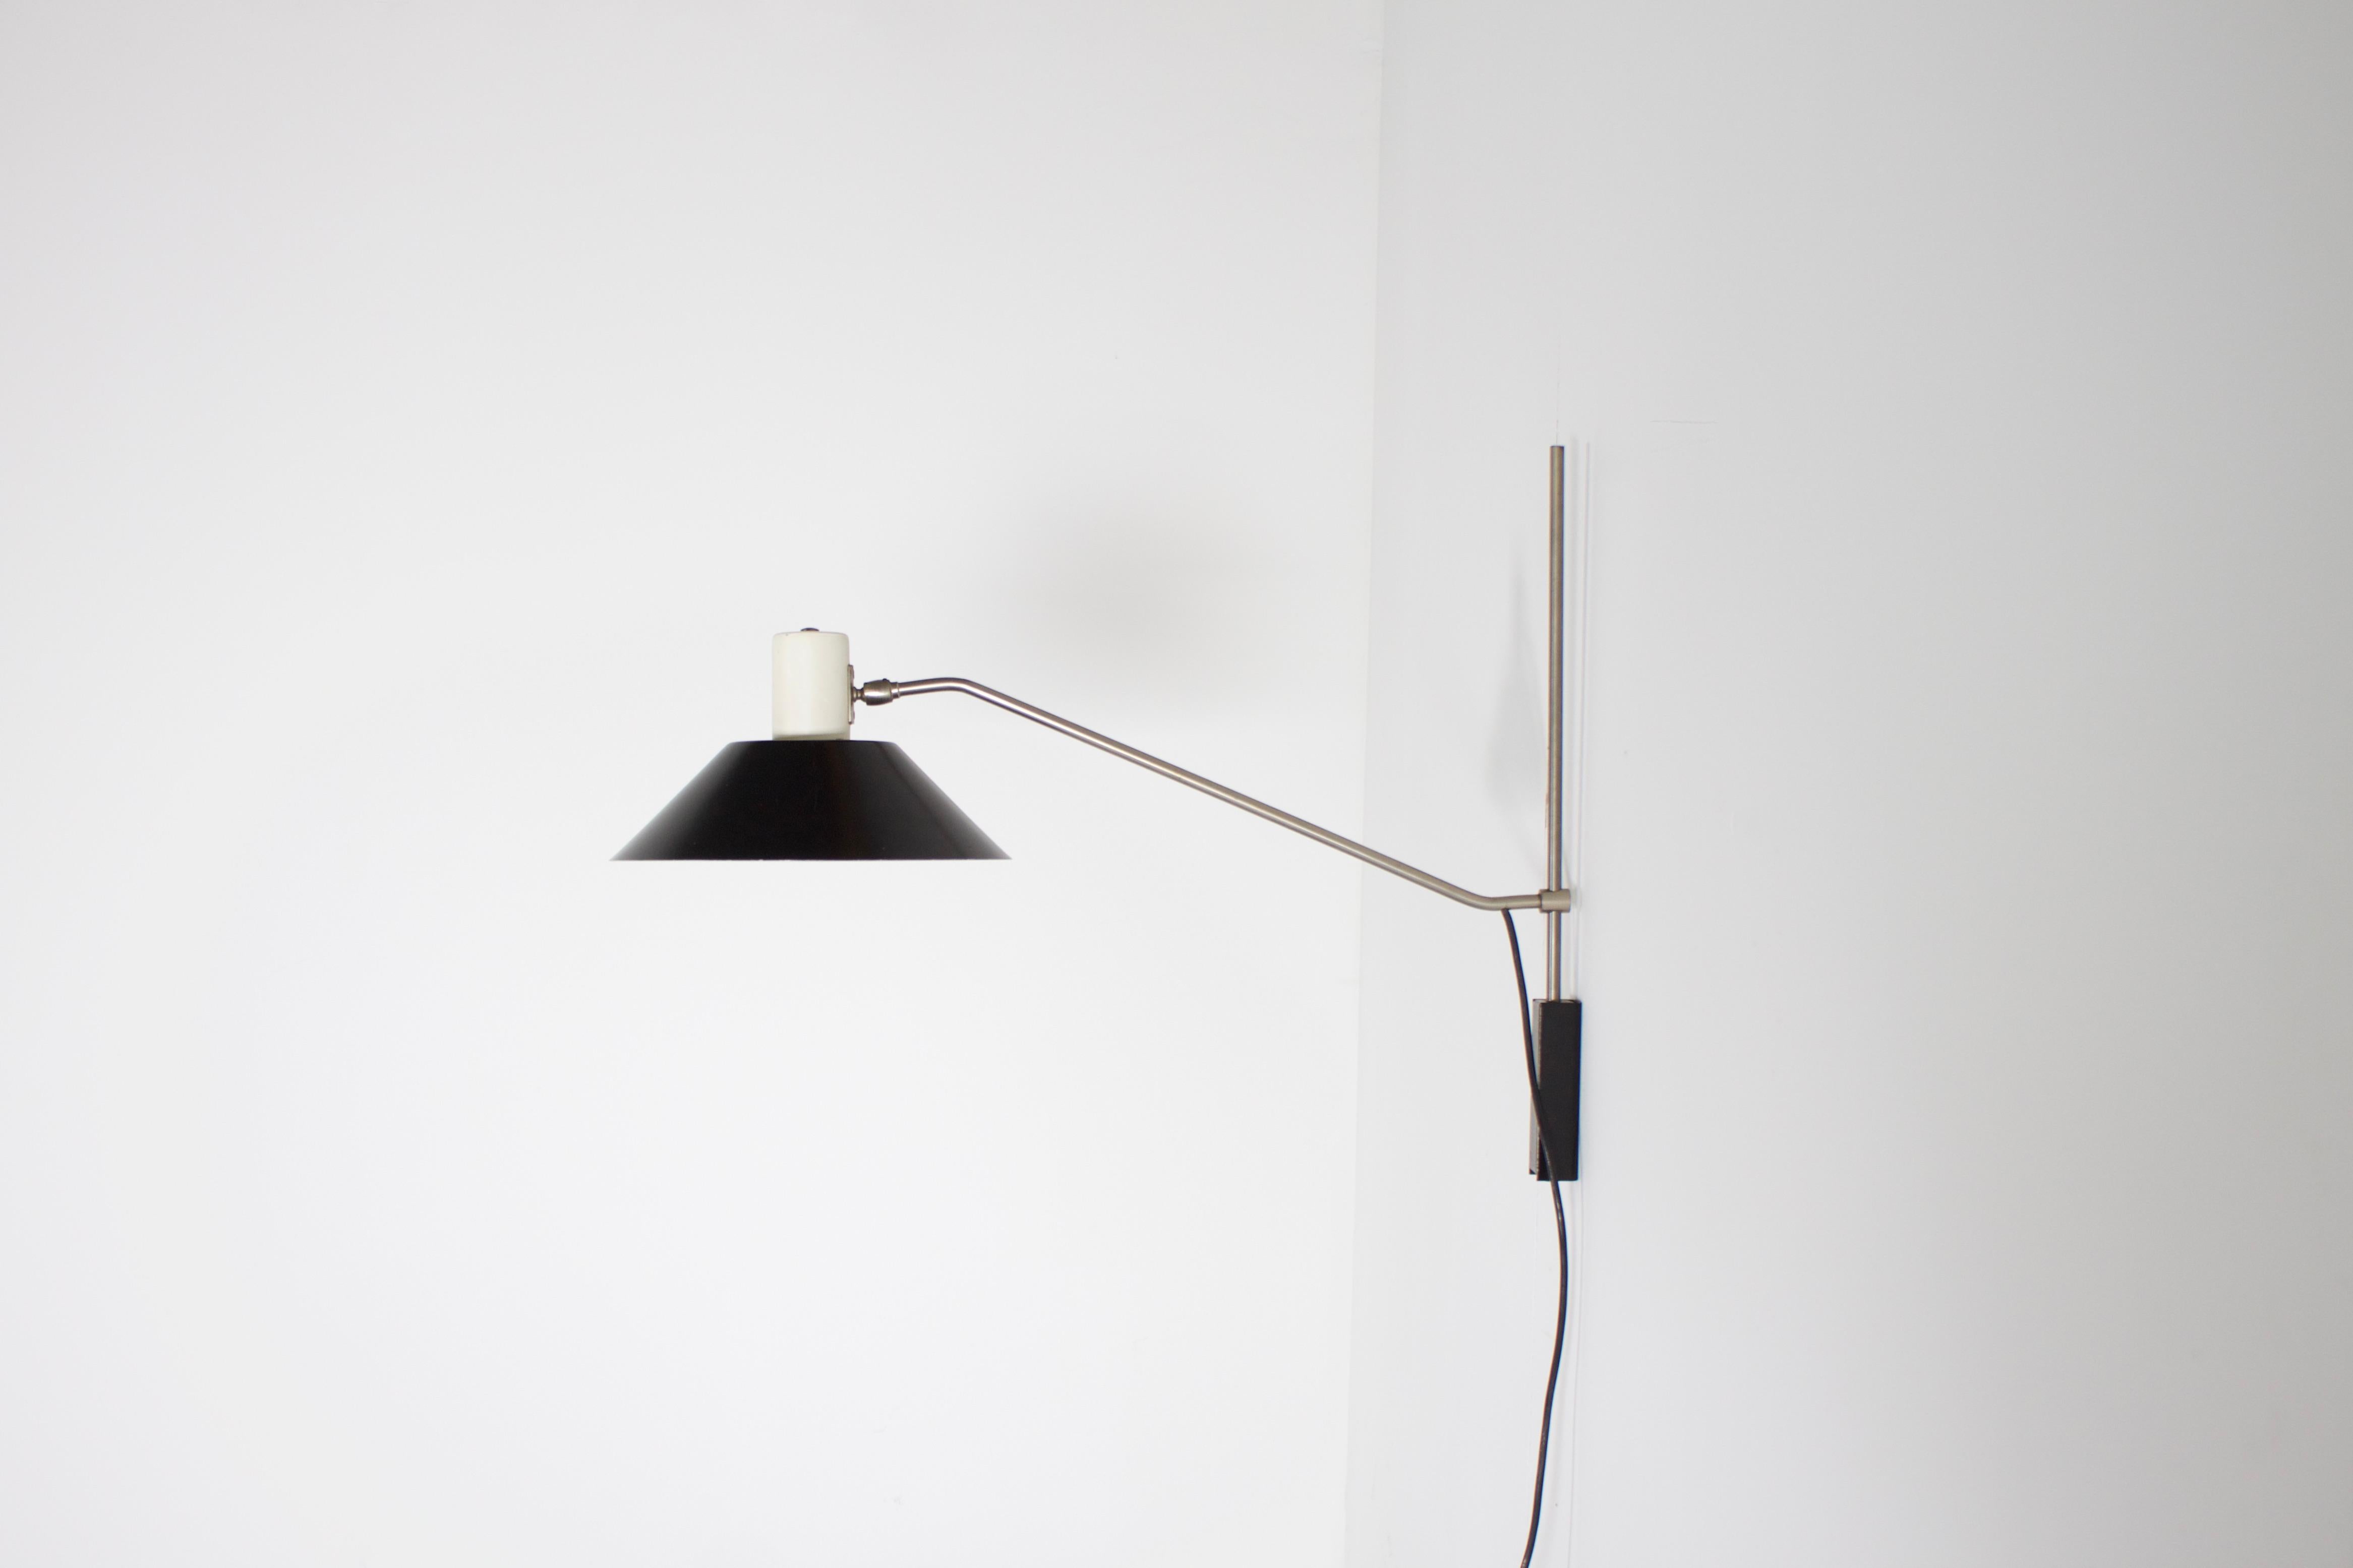 Modernist wall lamp, model 7078 in very good original condition.

Designed by Jan Hoogervorst, Netherlands, 1958.

Manufactured by Anvia Almelo.

The lamp has a black and white metal shade which can pivot and can be rotated 180 degrees.

The shade